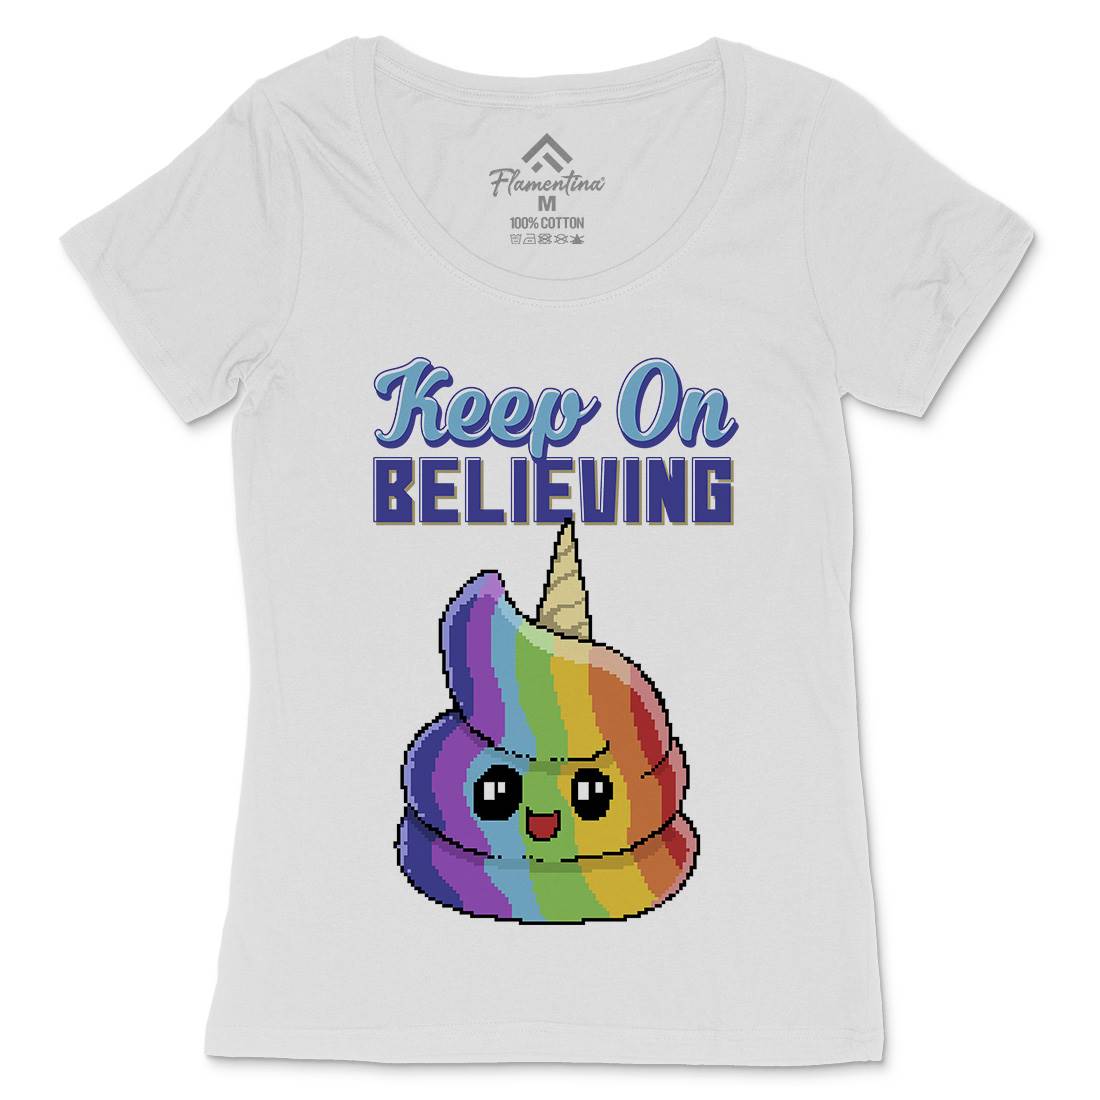 Keep On Believing Womens Scoop Neck T-Shirt Retro B921